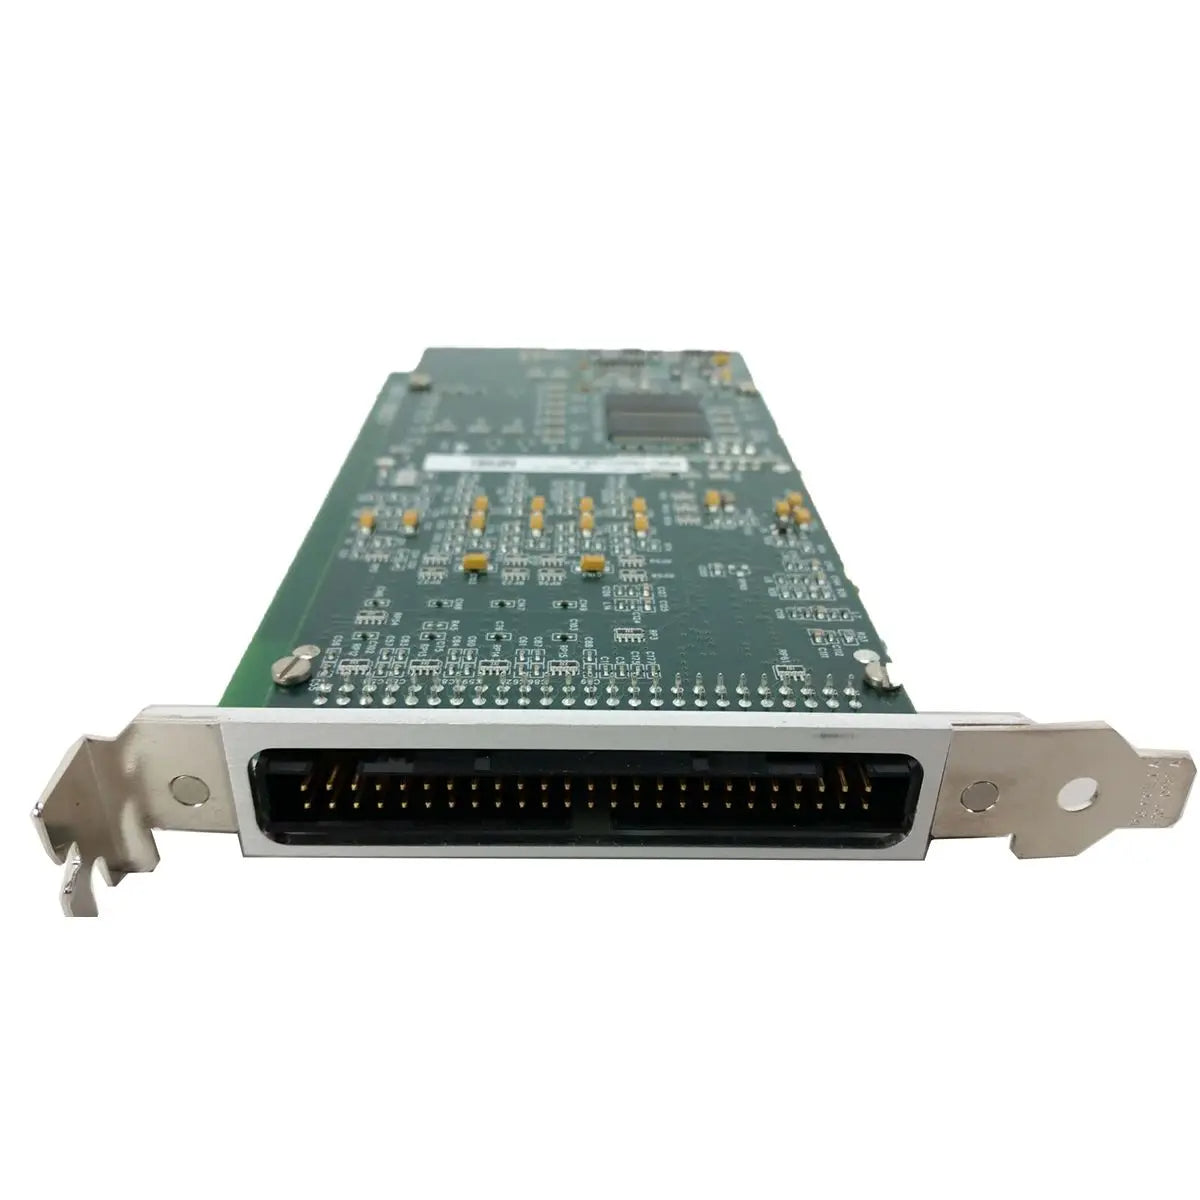 PMC-16AIO168-X GSC Communication Card PCI32-PMC-0-X Used